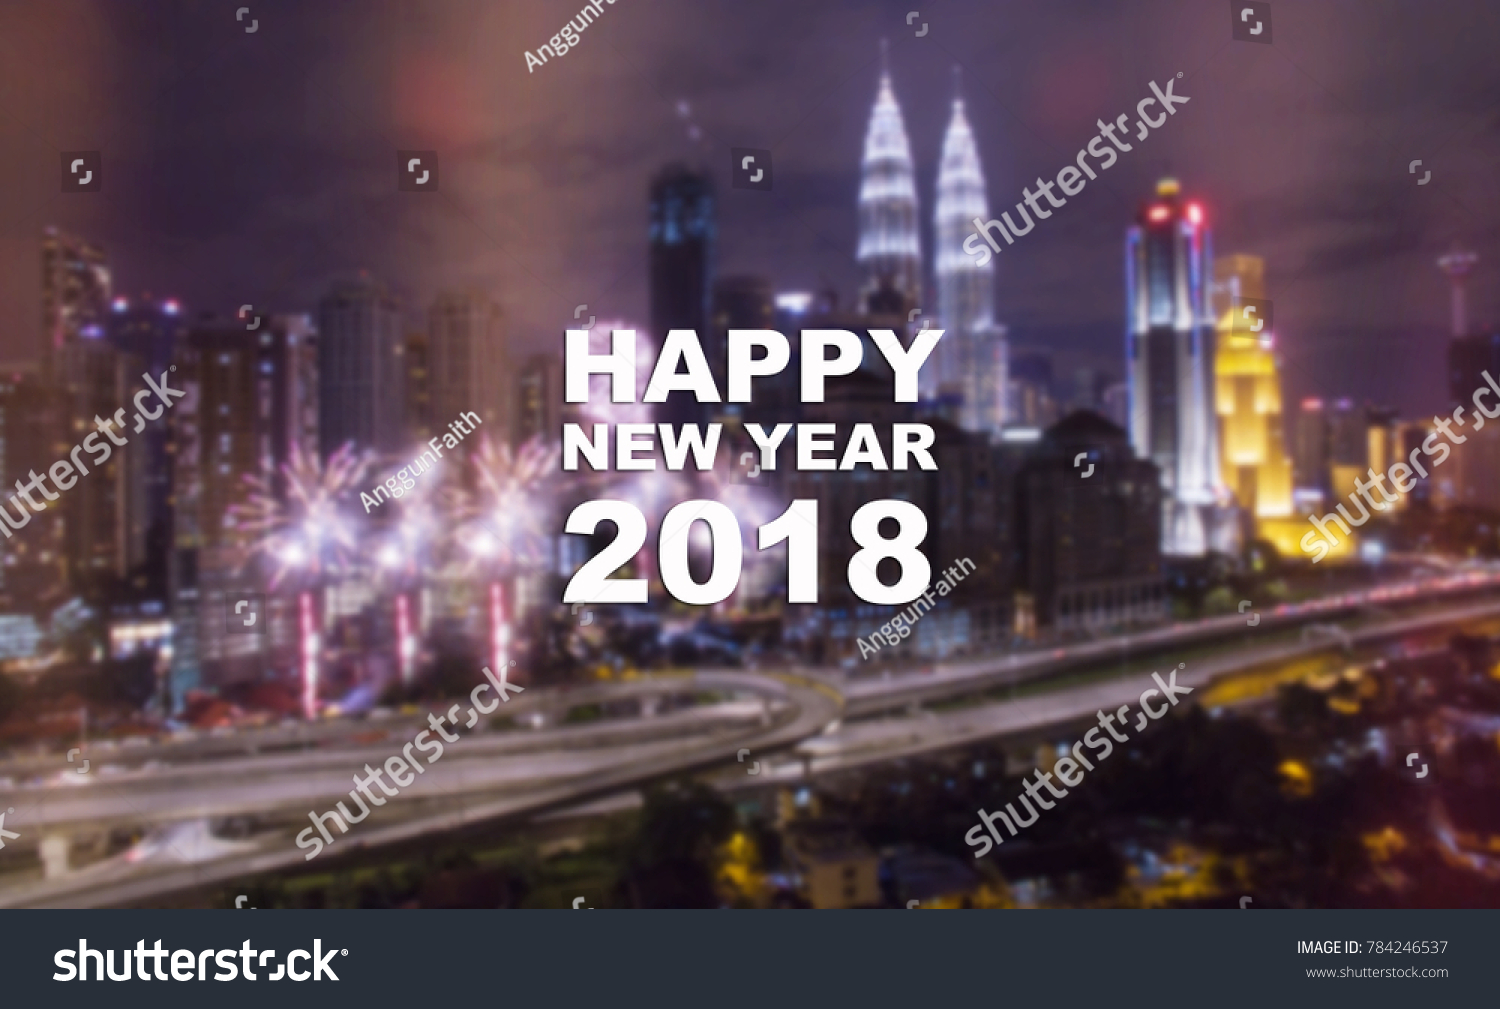 Happy New Year 2018 text on blurred metro city background at night with beautiful firework.Night city scape with fireworks. #784246537